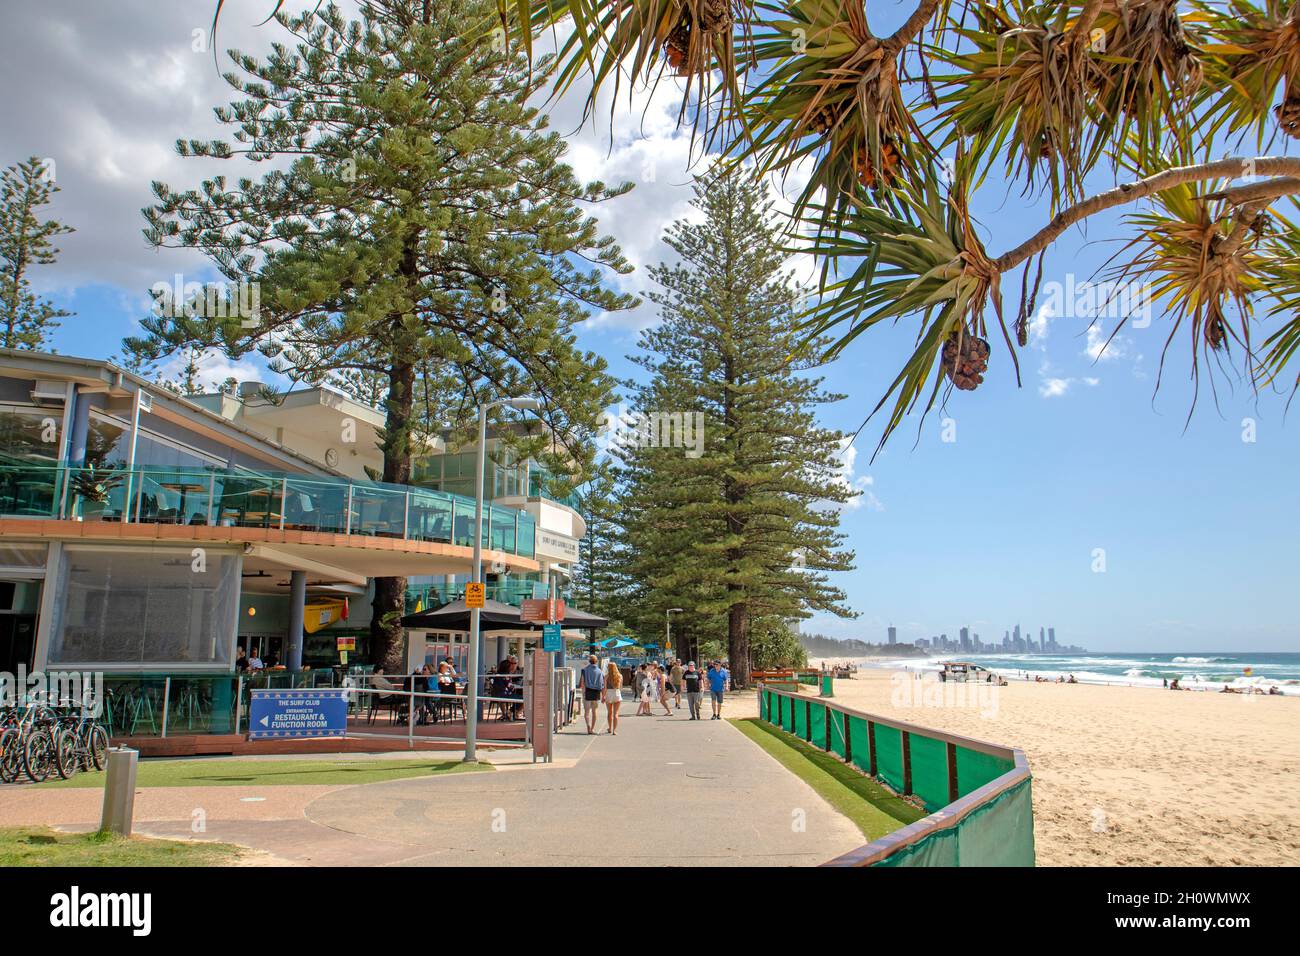 Burleigh Heads Banque D'Images